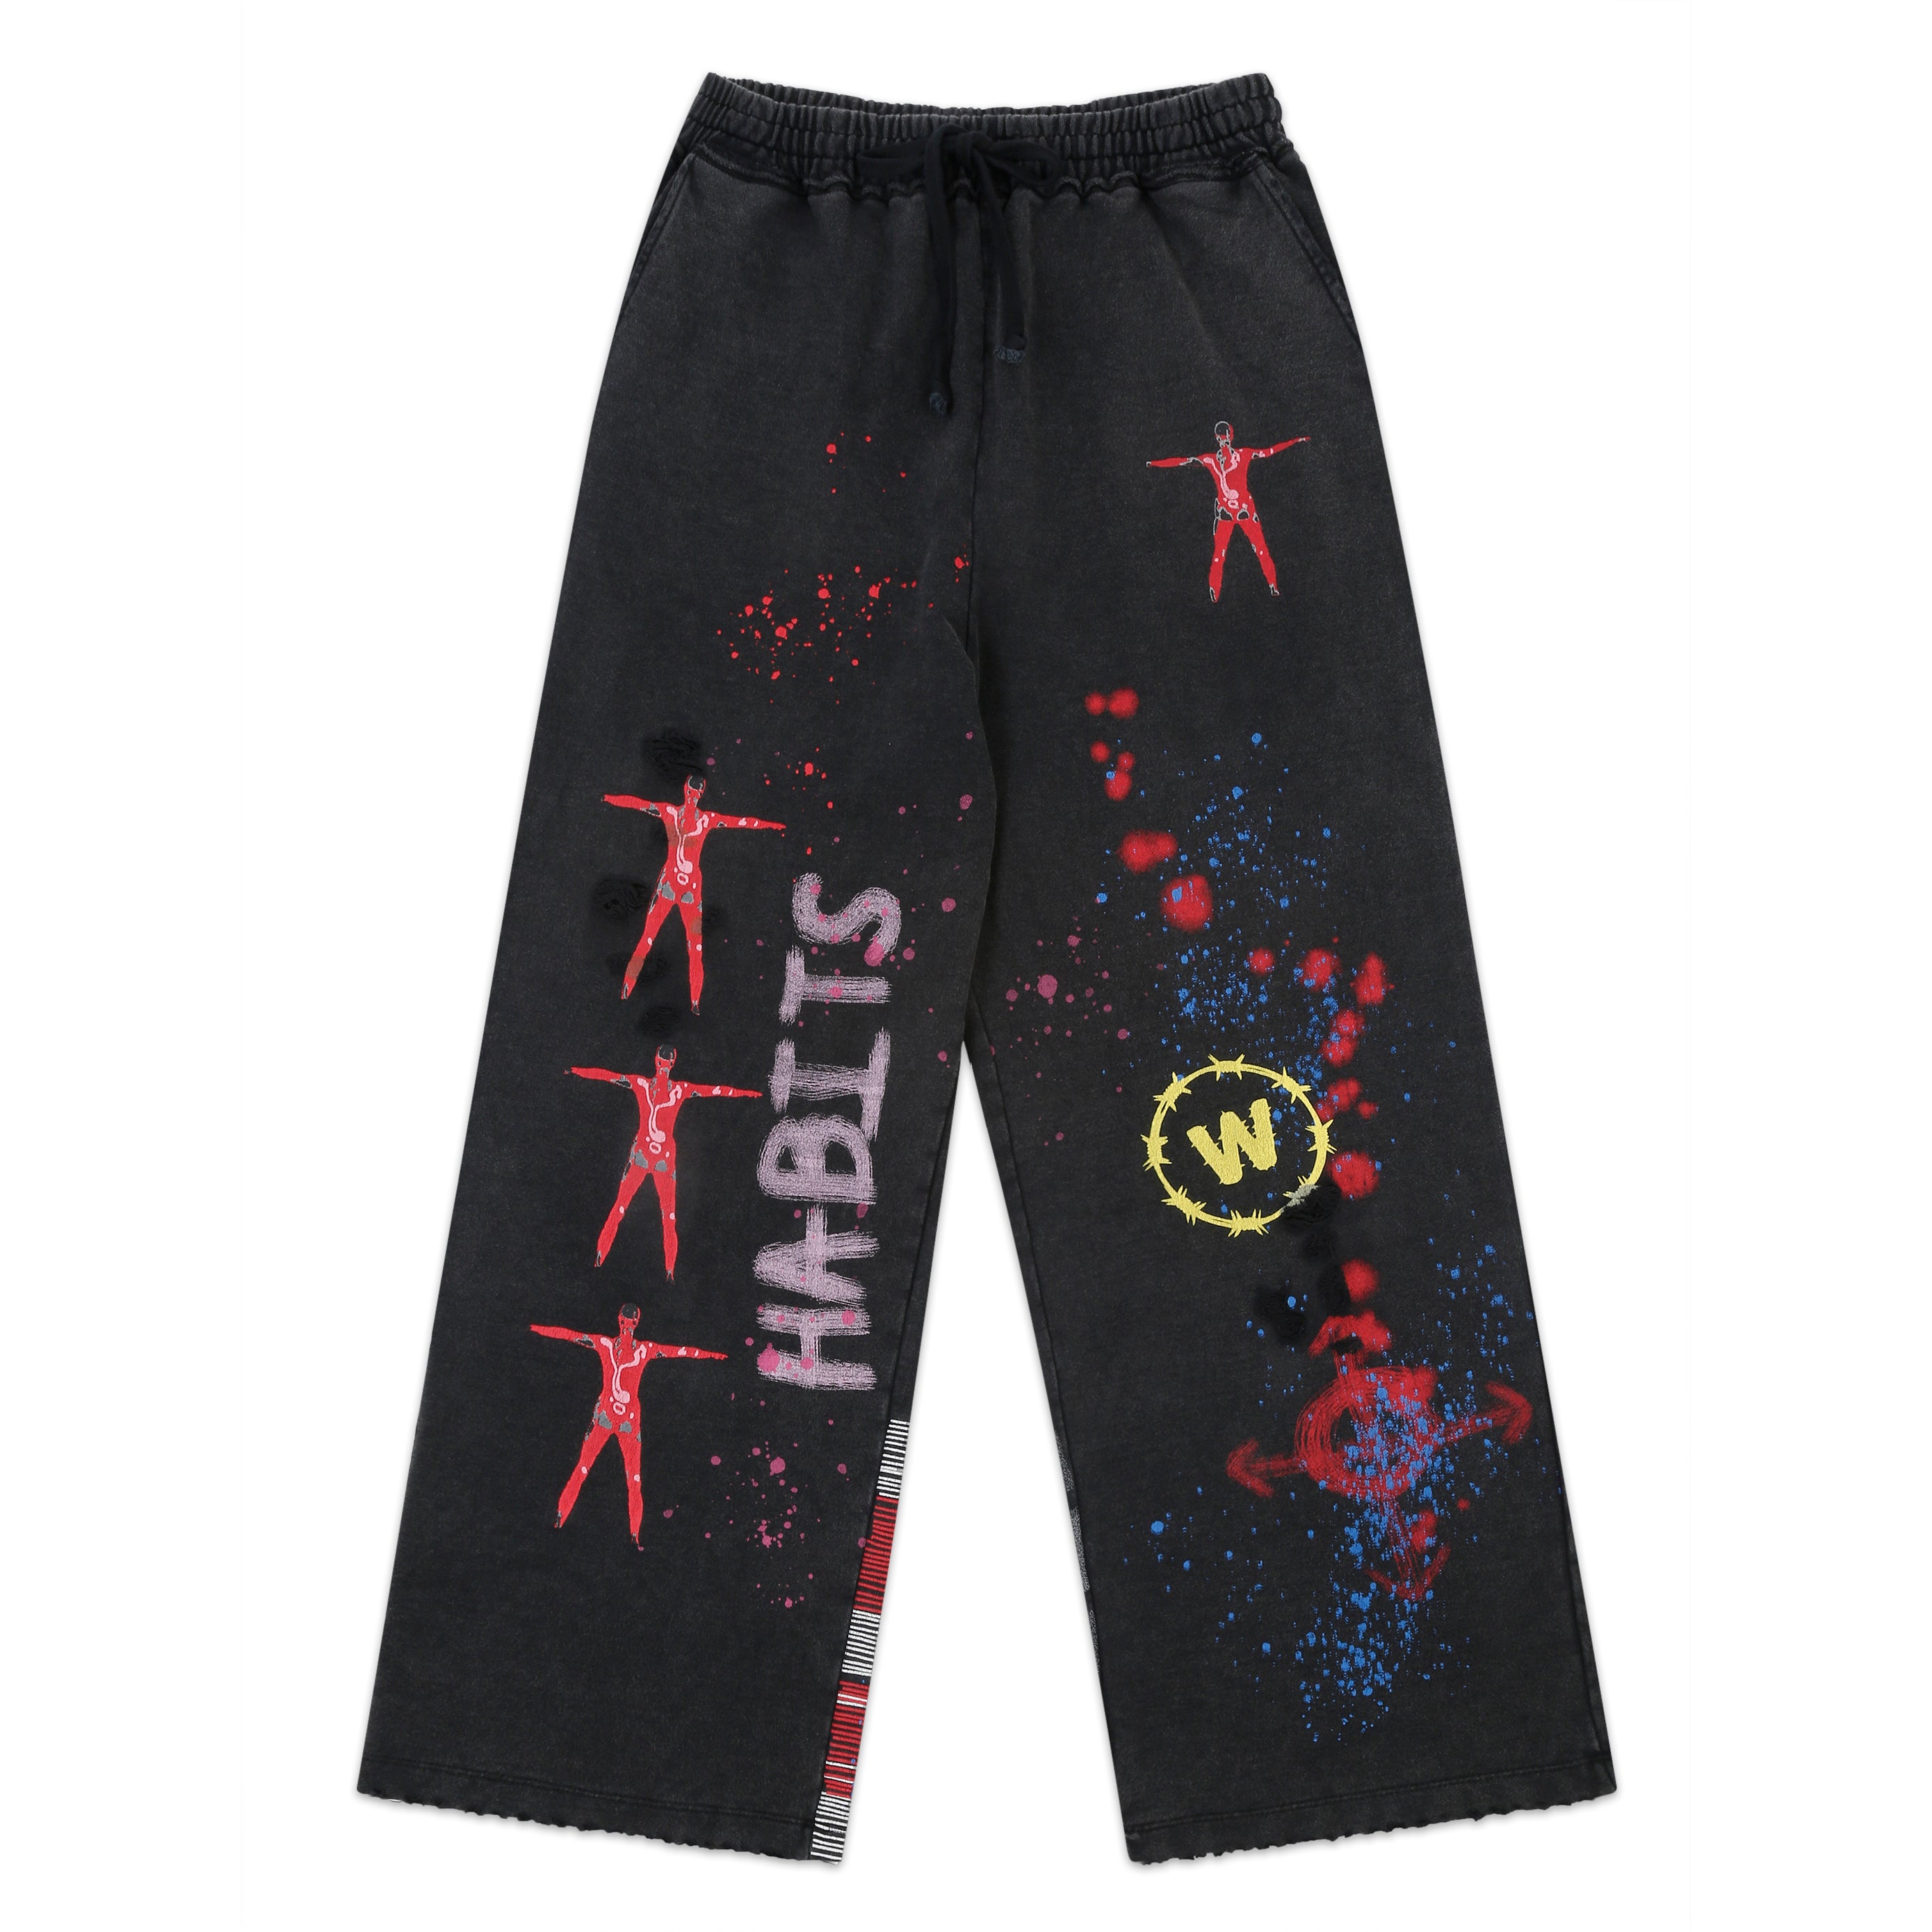 Sweatpants - Charcoal "Fly Me To The Moon"